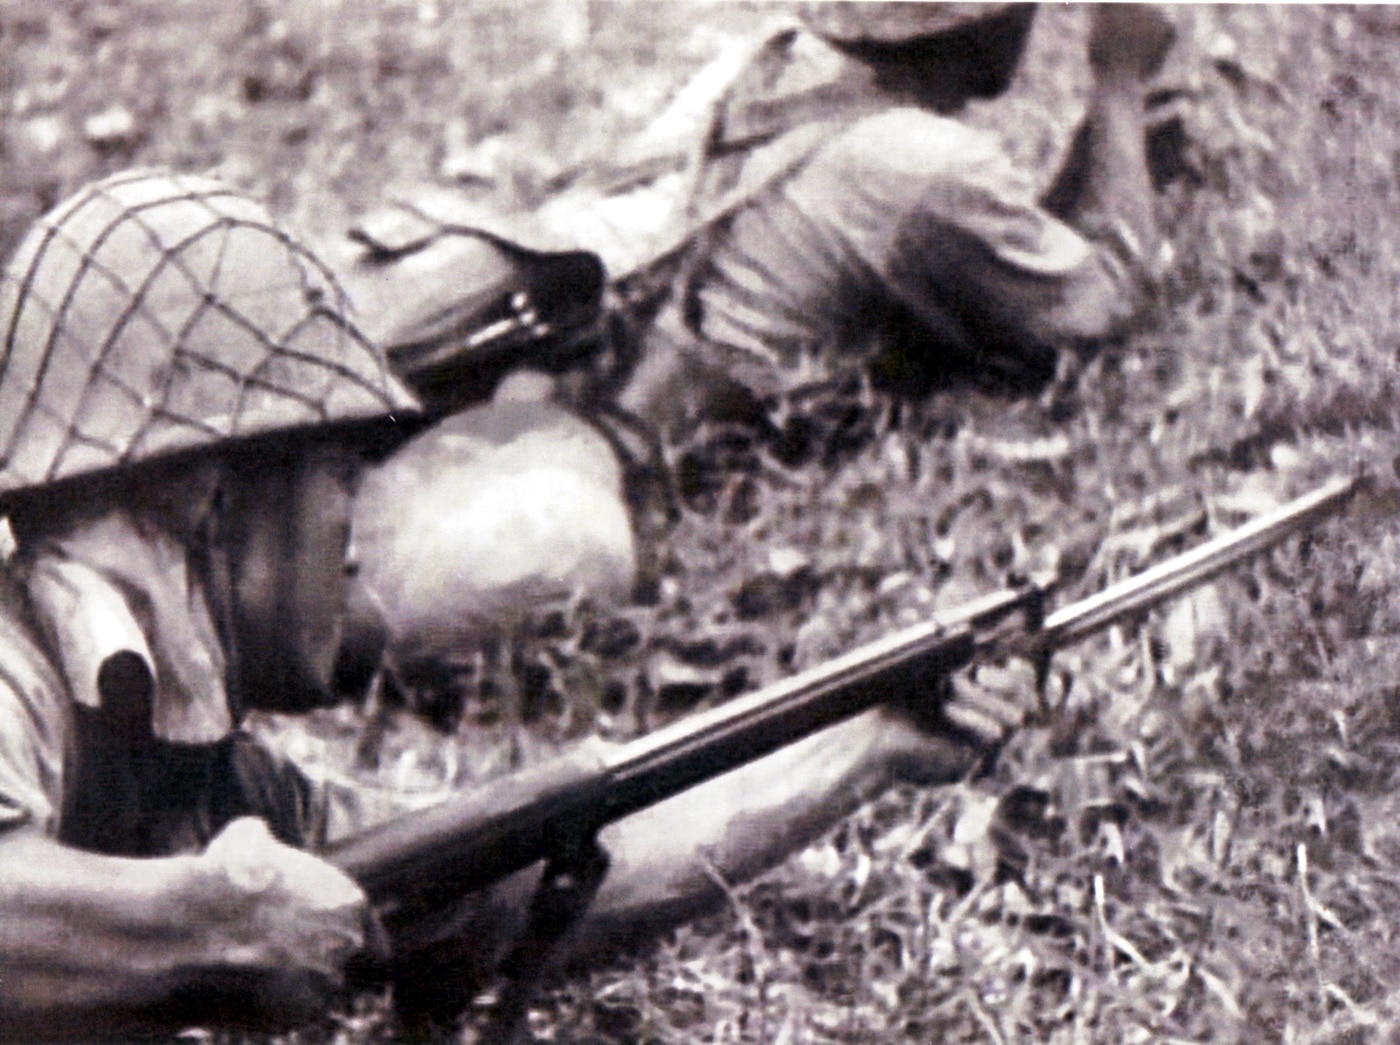 In this digital image, we see a Japanese soldier attaching a Type 30 bayonet to his rifle during a battle in the Pacific Theater.